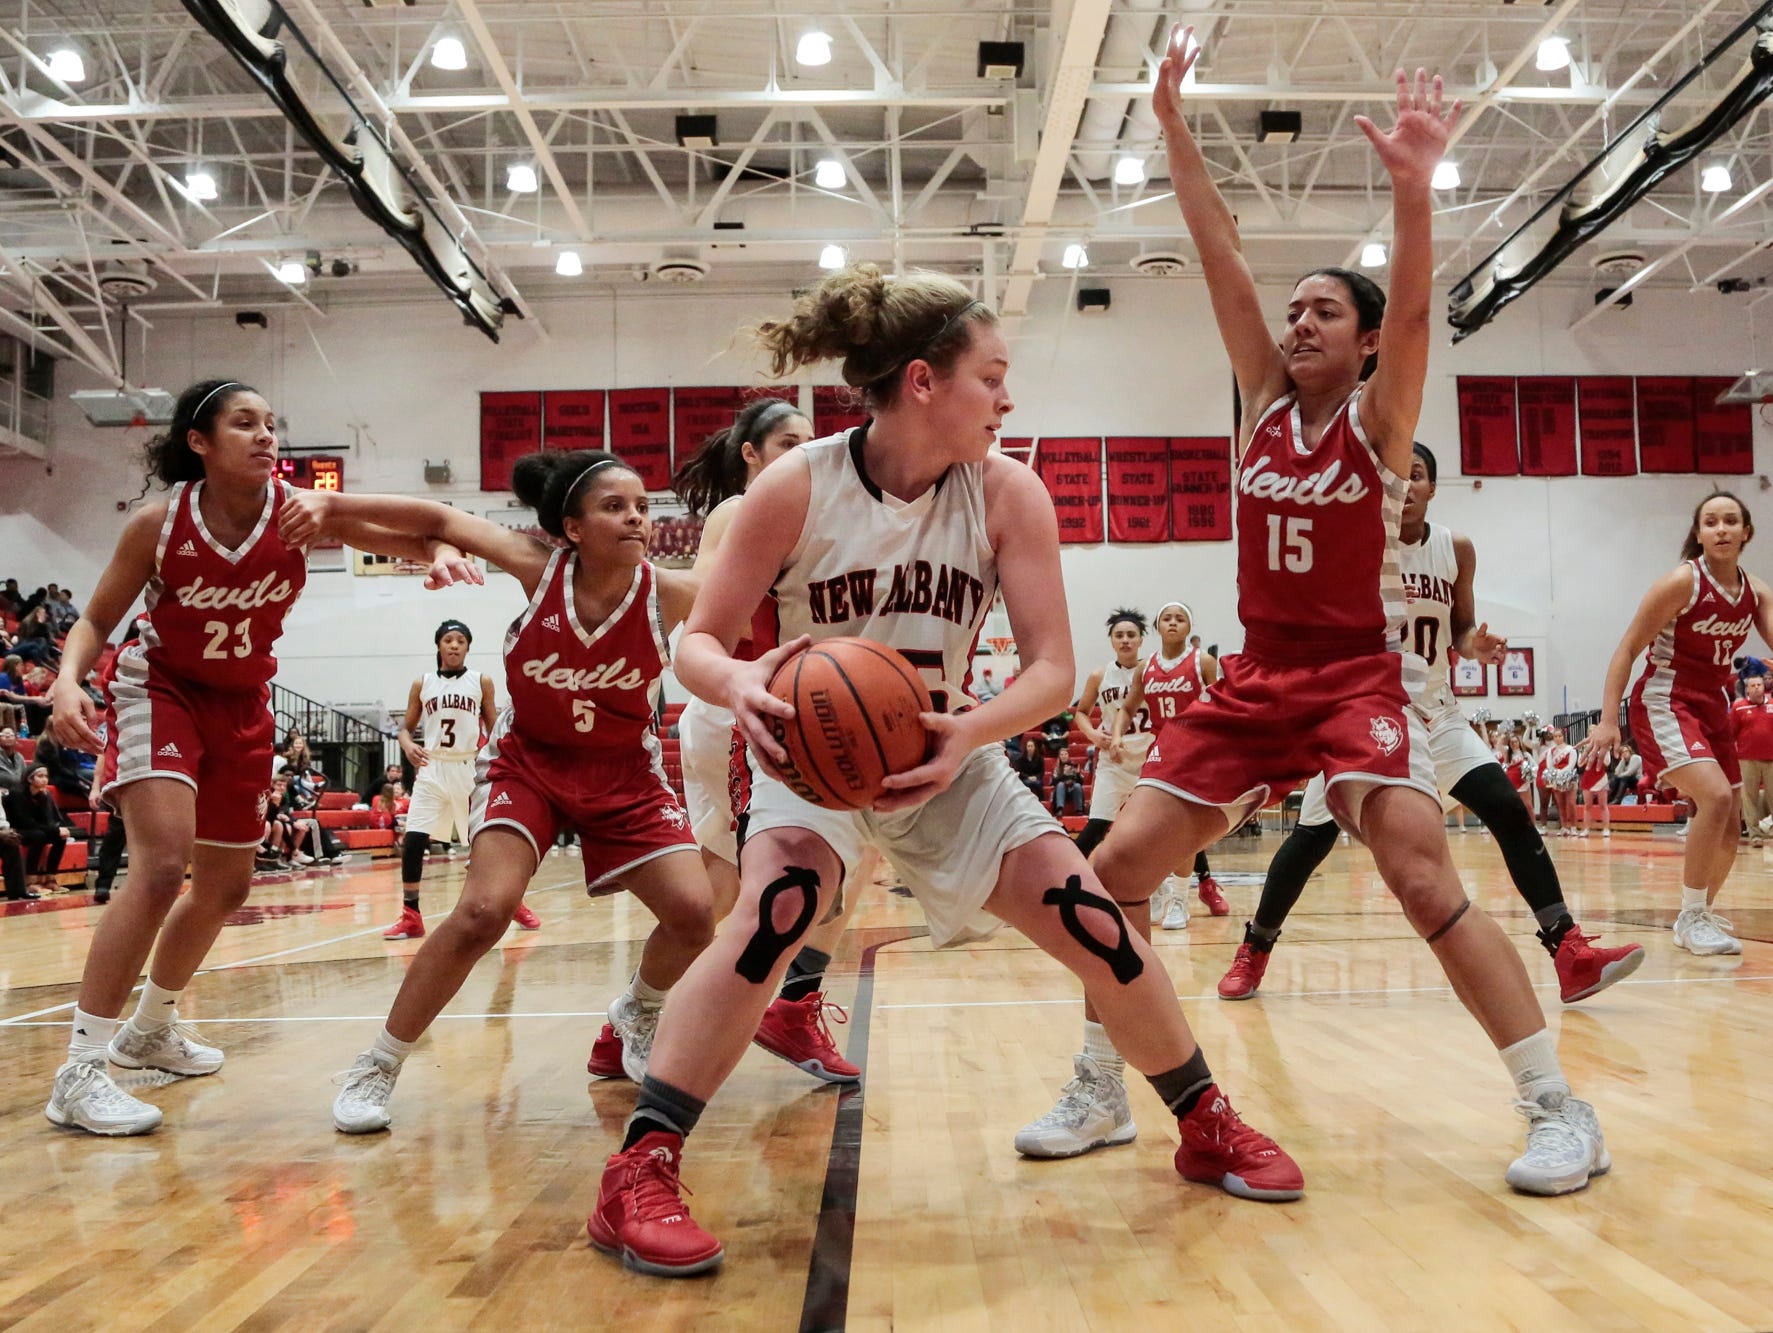 New Albany's Marissa Jones (23) looks to pass while heavily guarded by a swarm of Jeffersonville Devils during the second half of play, Wednesday, Jan. 27, 2016, at New Albany High School in New Albany, In.